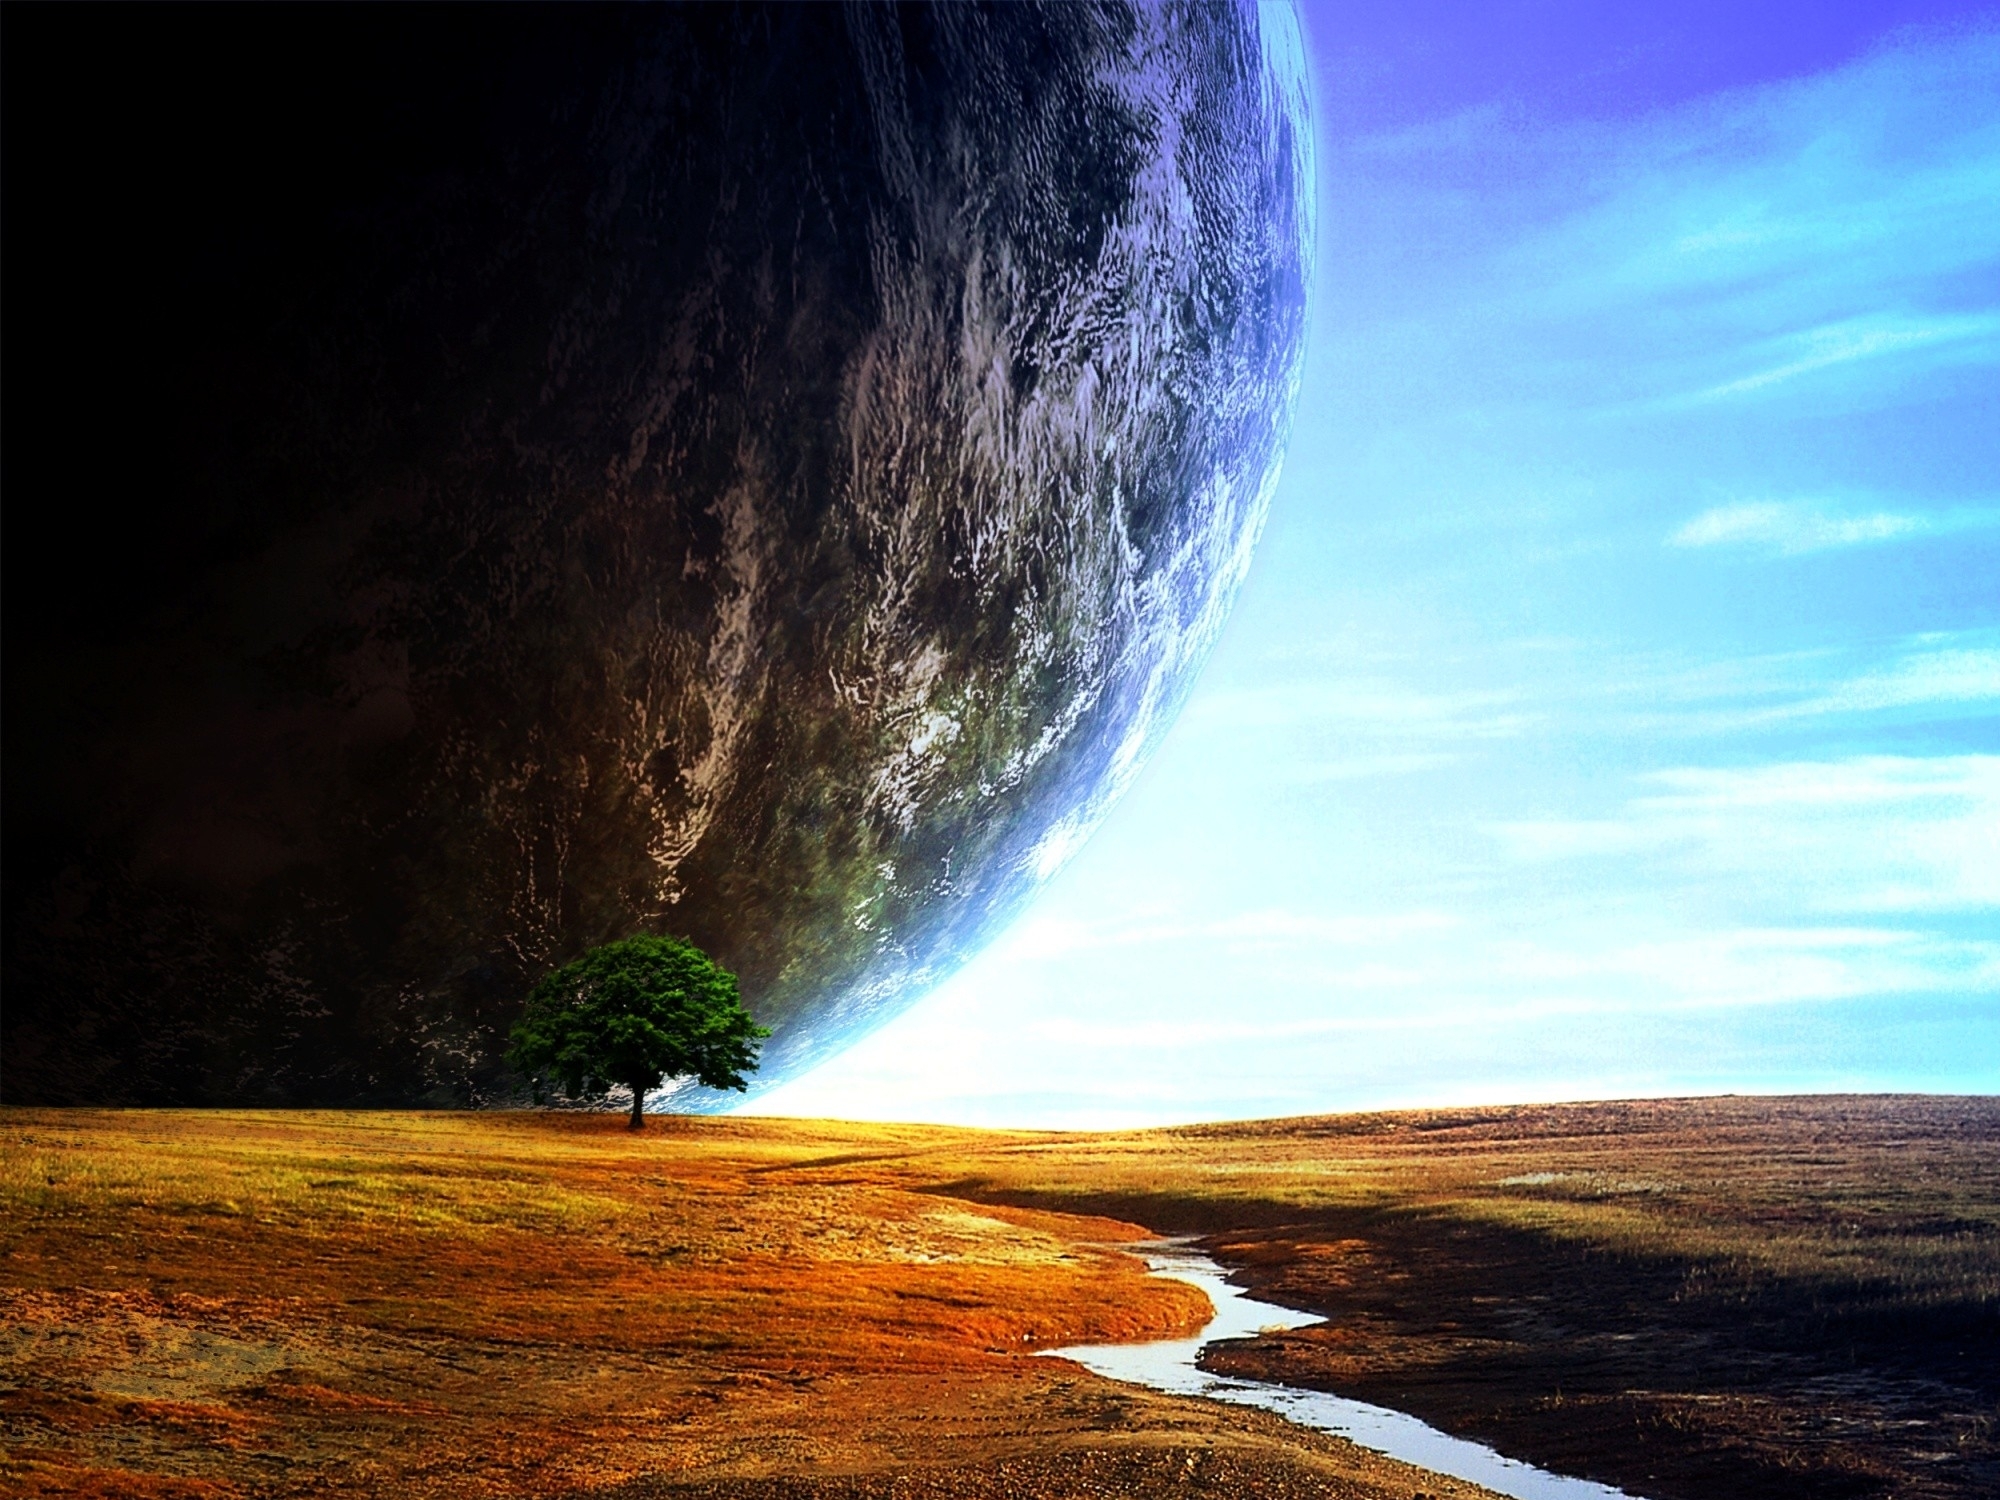 planets, Sci fi, Space, Nature, Trees, Landscapes, Cg, Digtal, Art, Stream, Sky, Clouds Wallpapers HD / and Mobile Backgrounds